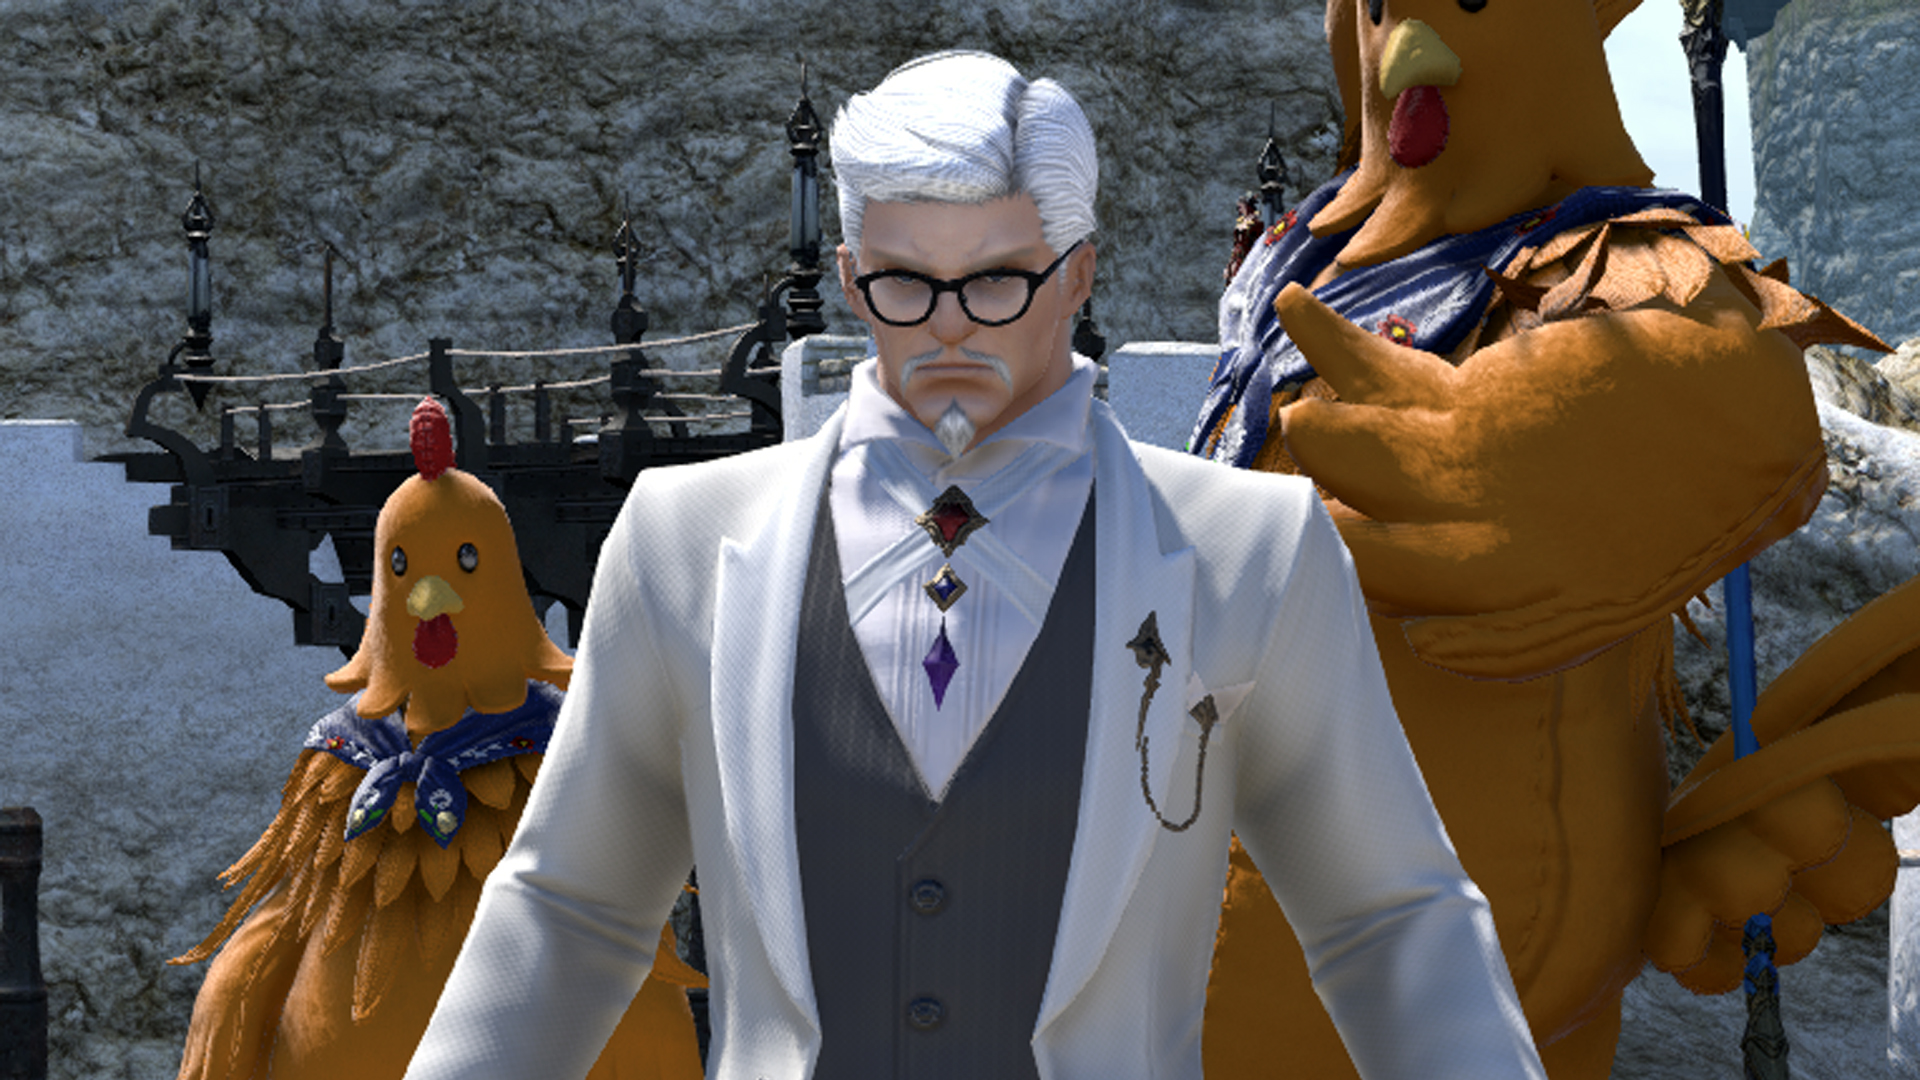 Colonel Sanders and a giant chicken are photobombing and confusing FFXIV players